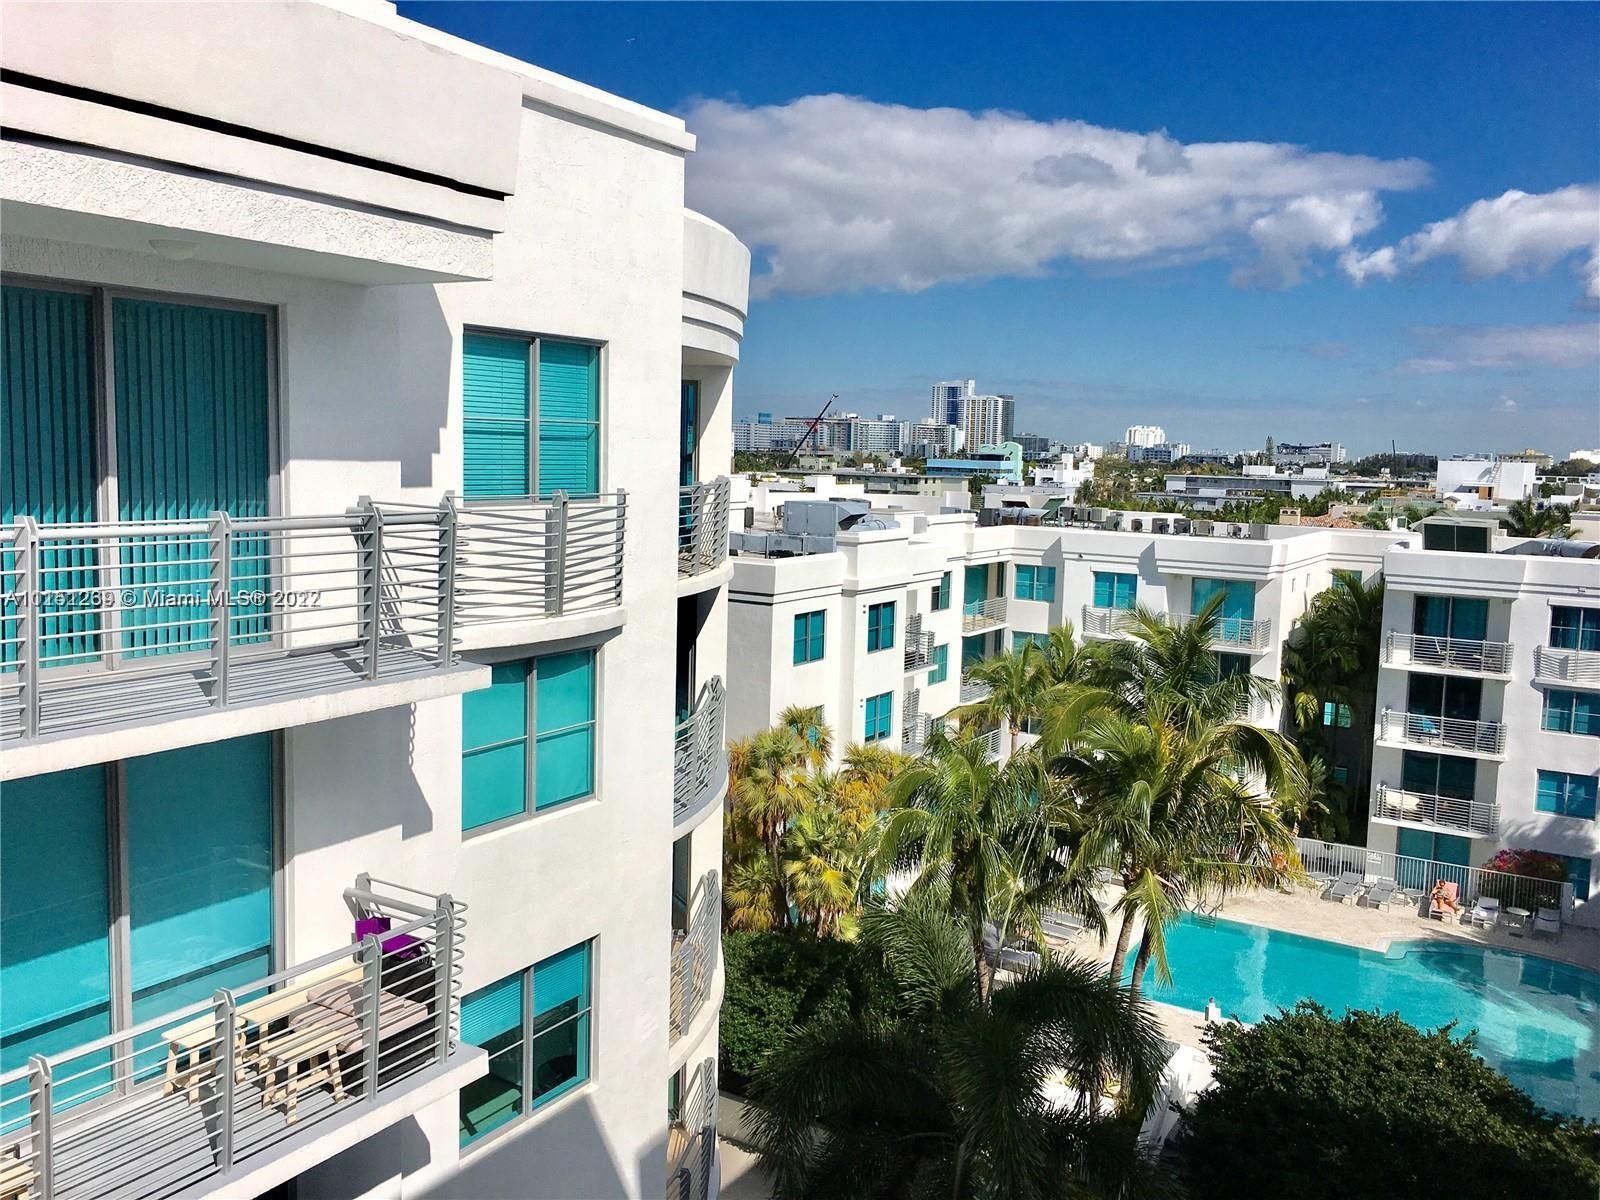 Cosmopolitan condos for sale and rent South Beach